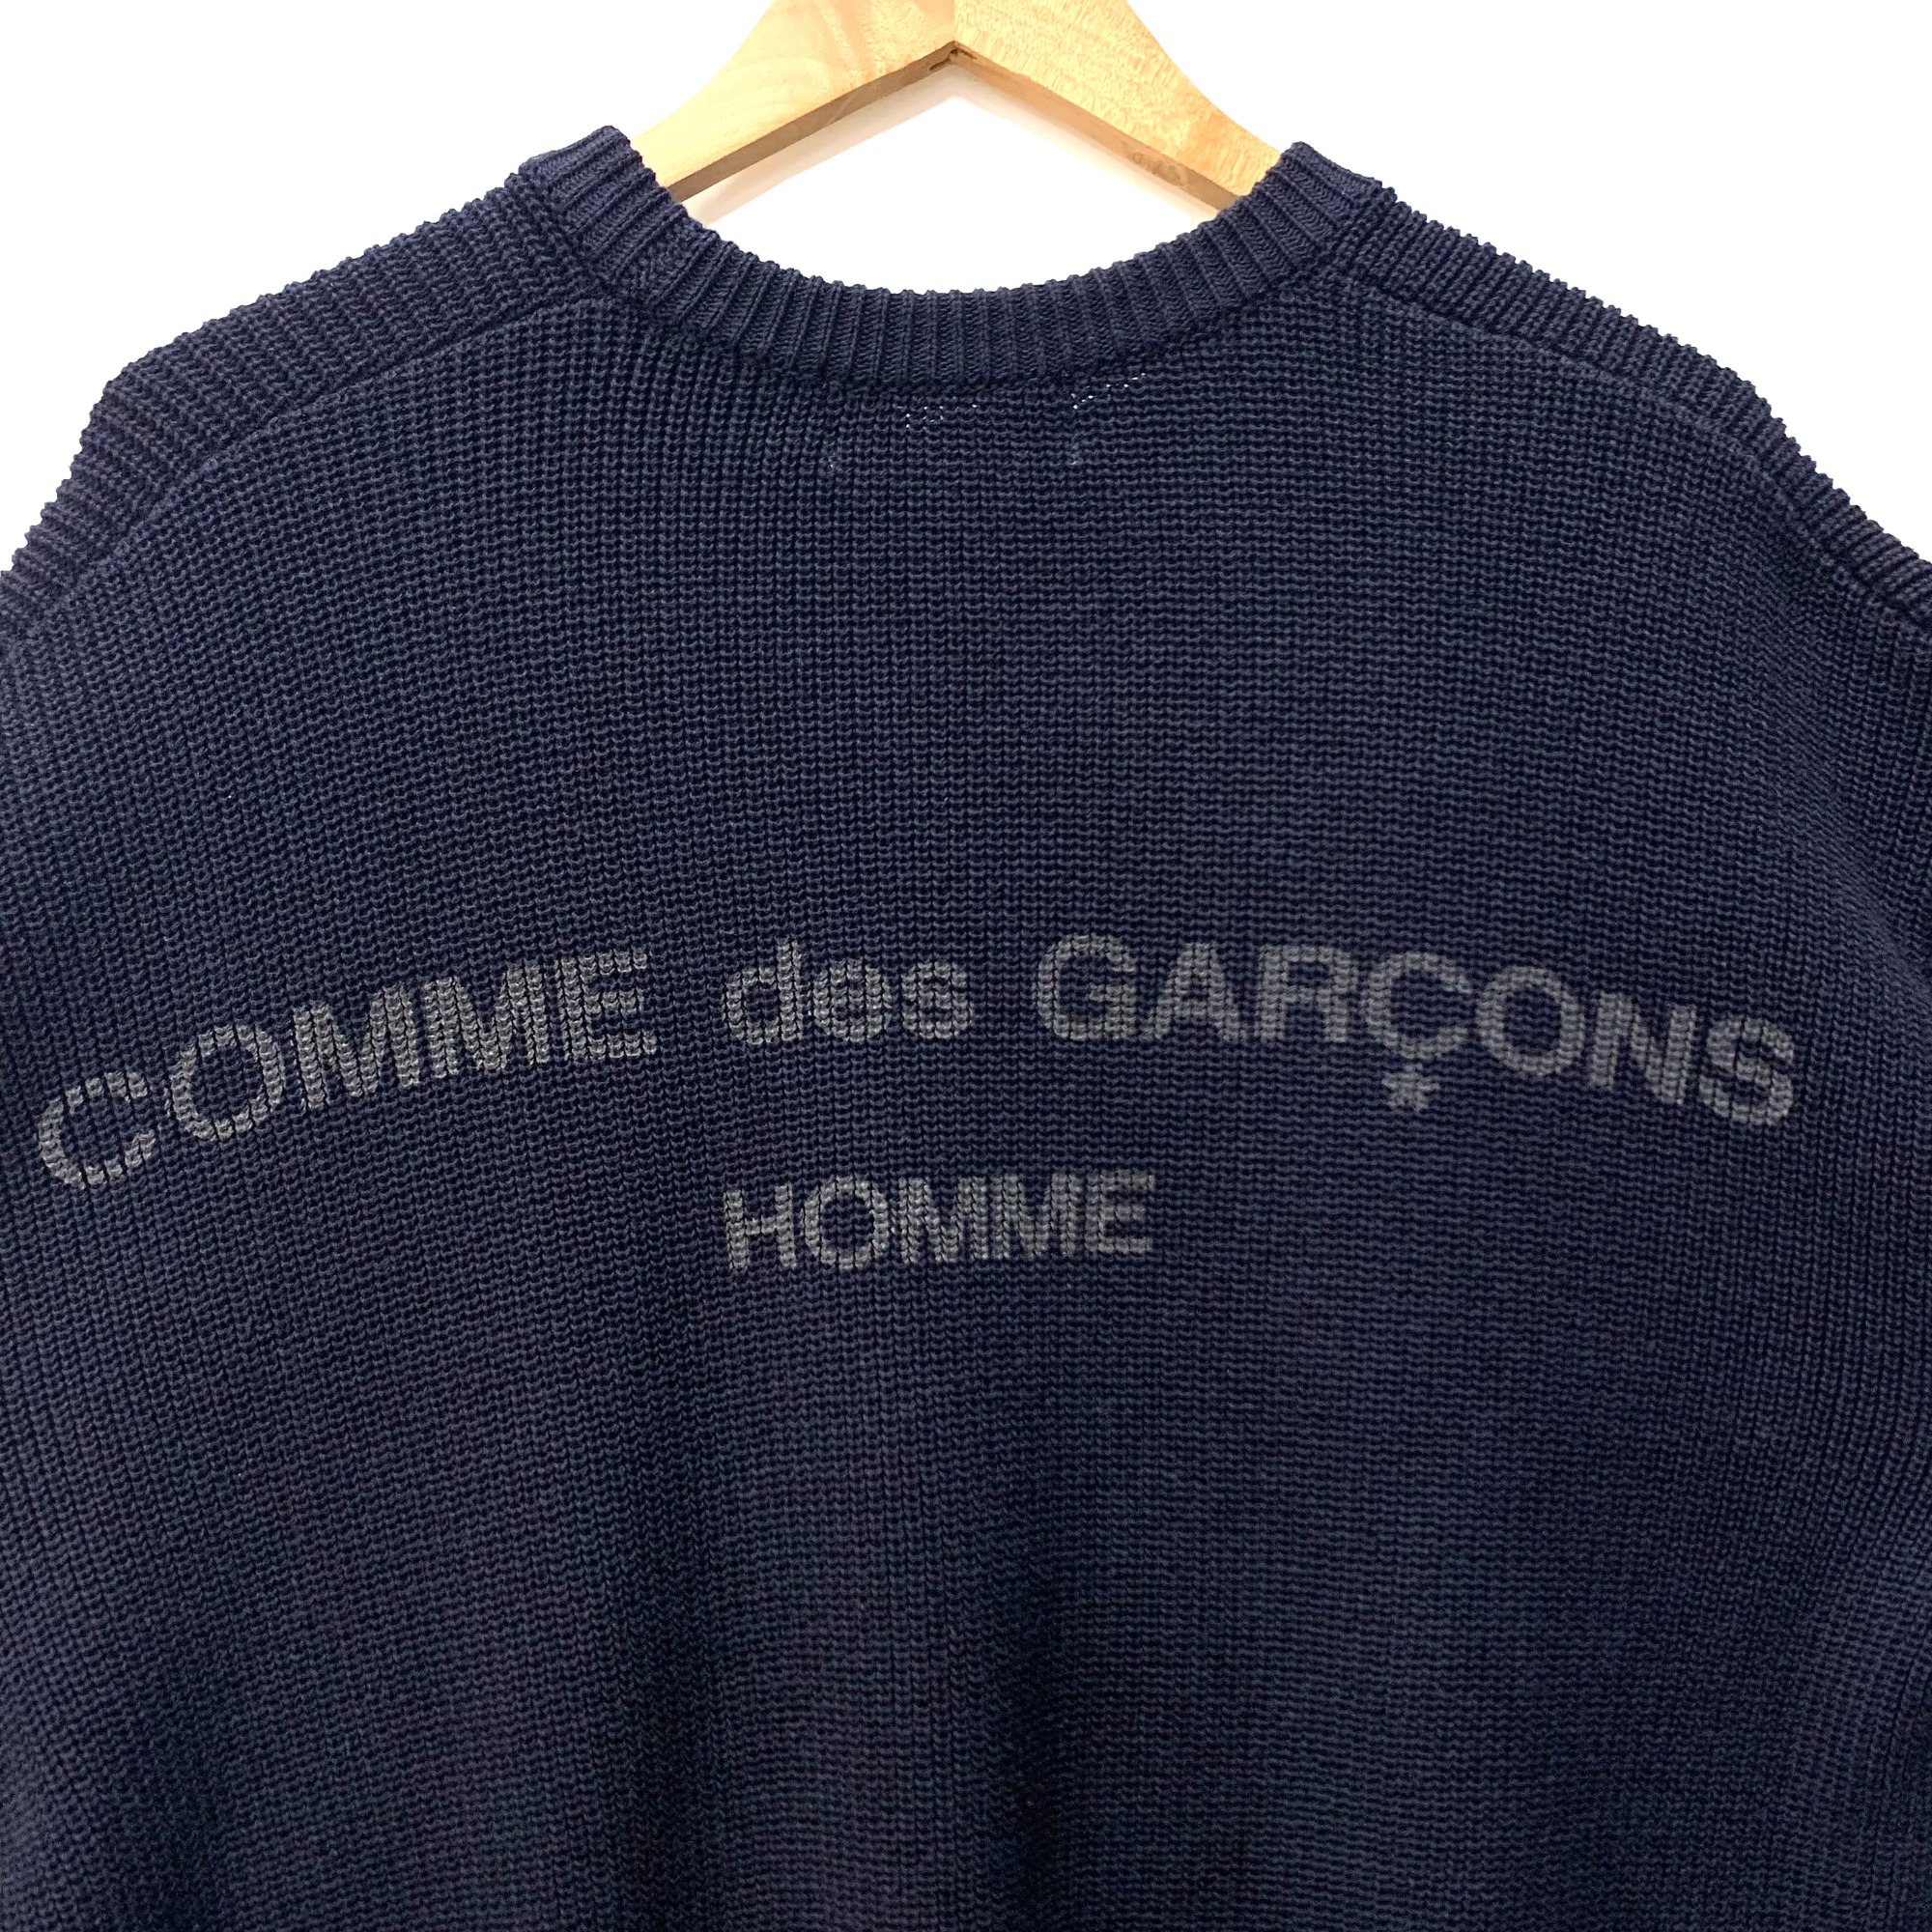 COMME des GARCONS HOMME】80'sアーカイブニットアイテム買取入荷 